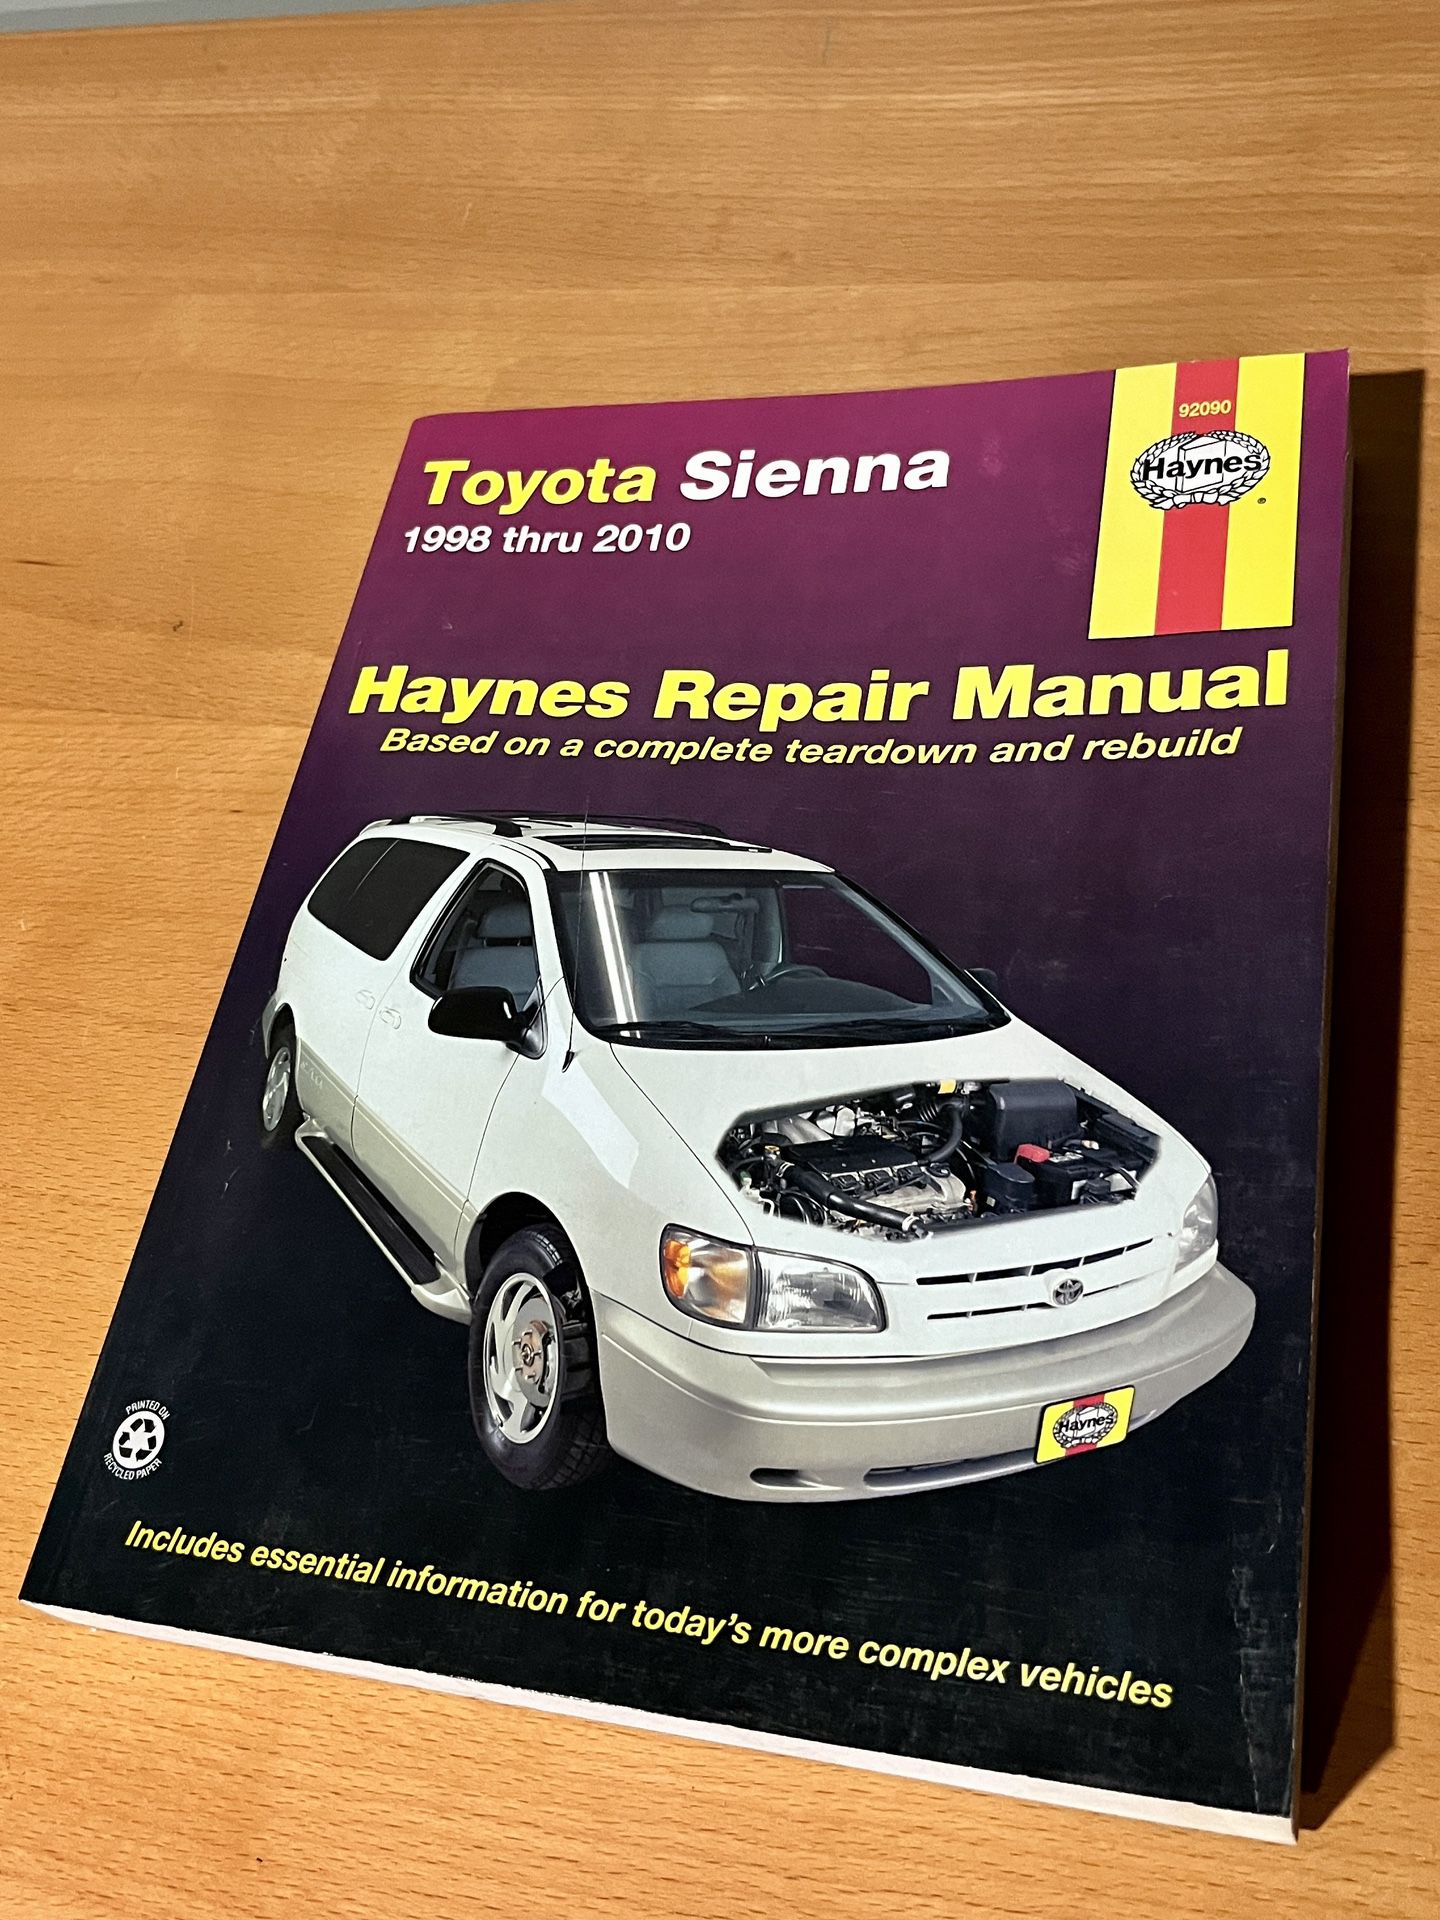 Haynes Repair Manual Toyota Sienna (1(contact info removed))